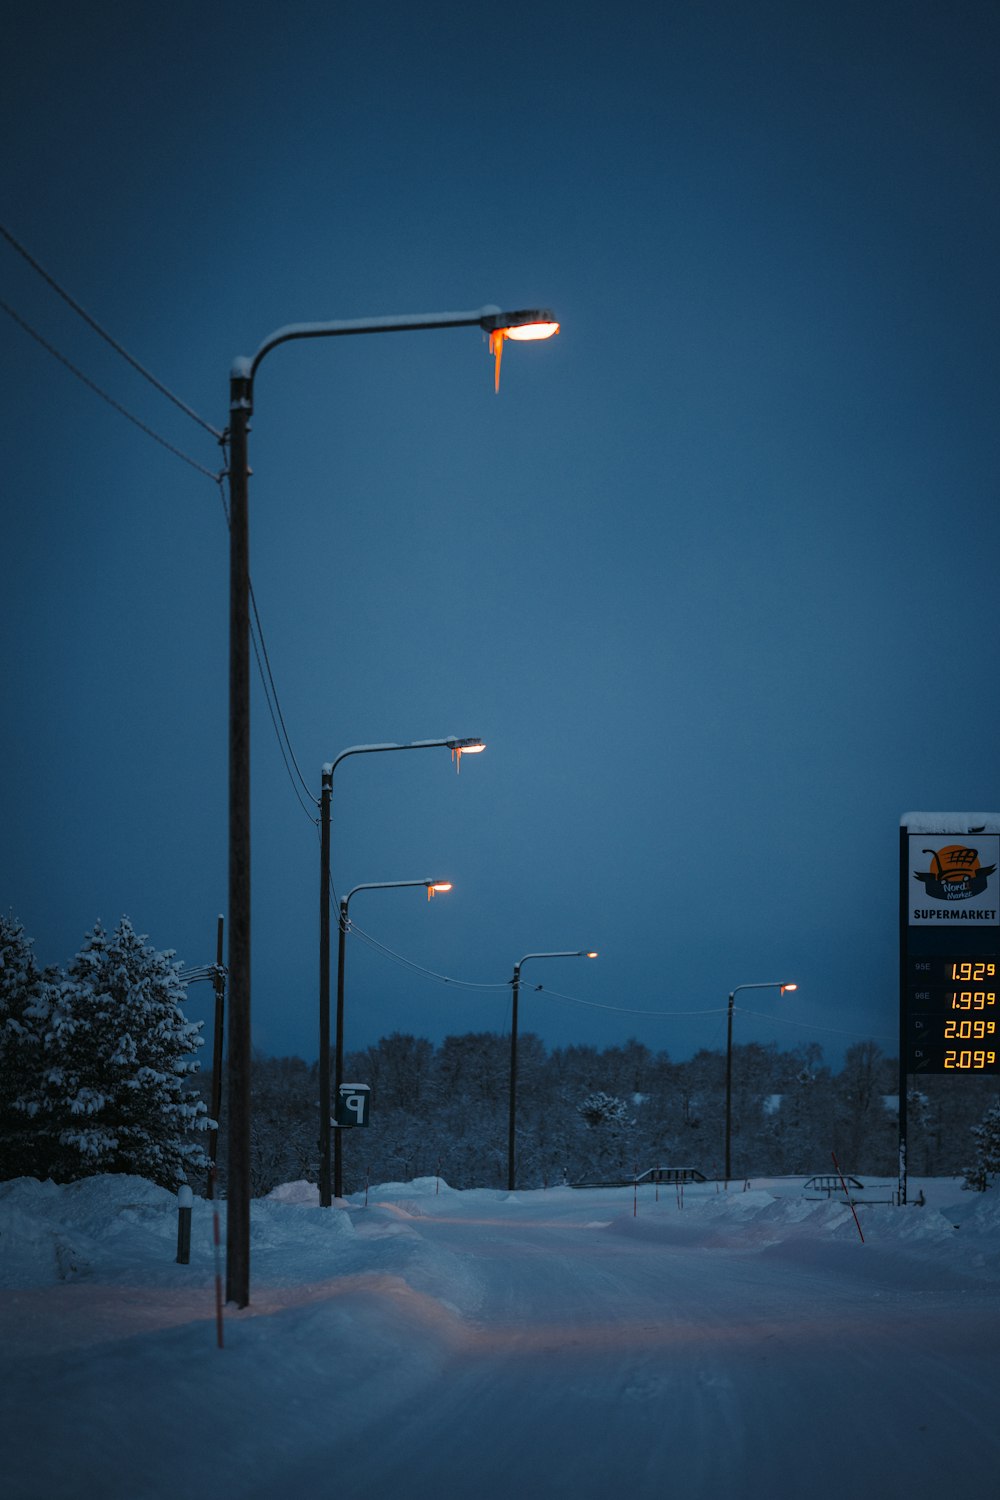 a street light in the middle of a snowy street